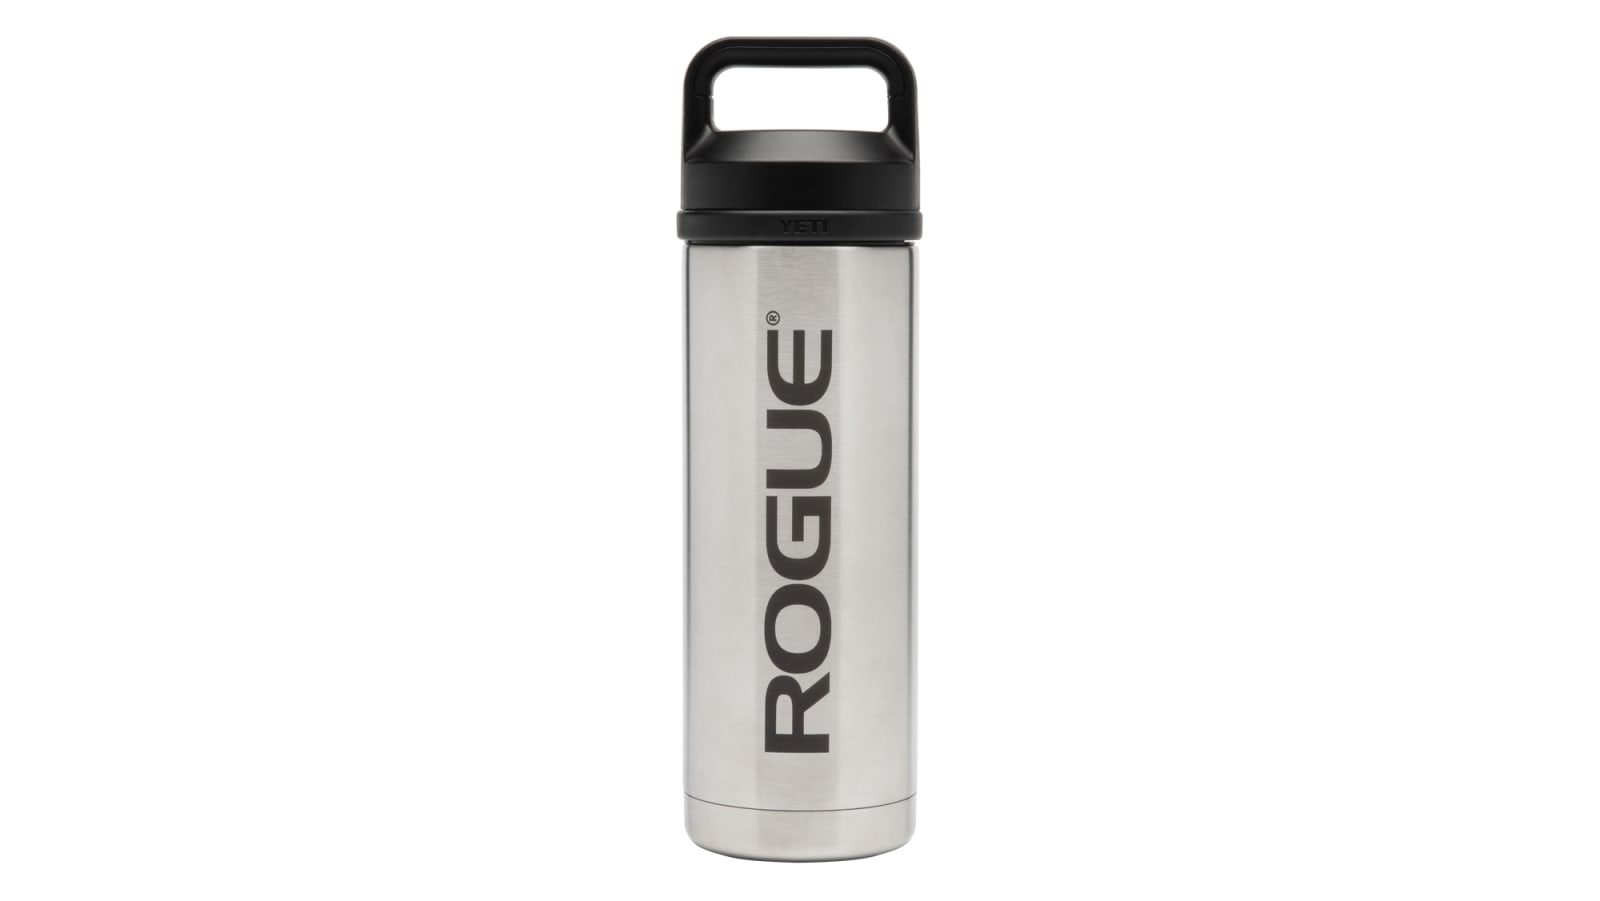 https://assets.roguefitness.com/f_auto,q_auto,c_limit,w_1600,b_rgb:ffffff/catalog/Gear%20and%20Accessories/Accessories/Shakers%20and%20Bottles/YT0059/YT0059-H_dgoyvi.png